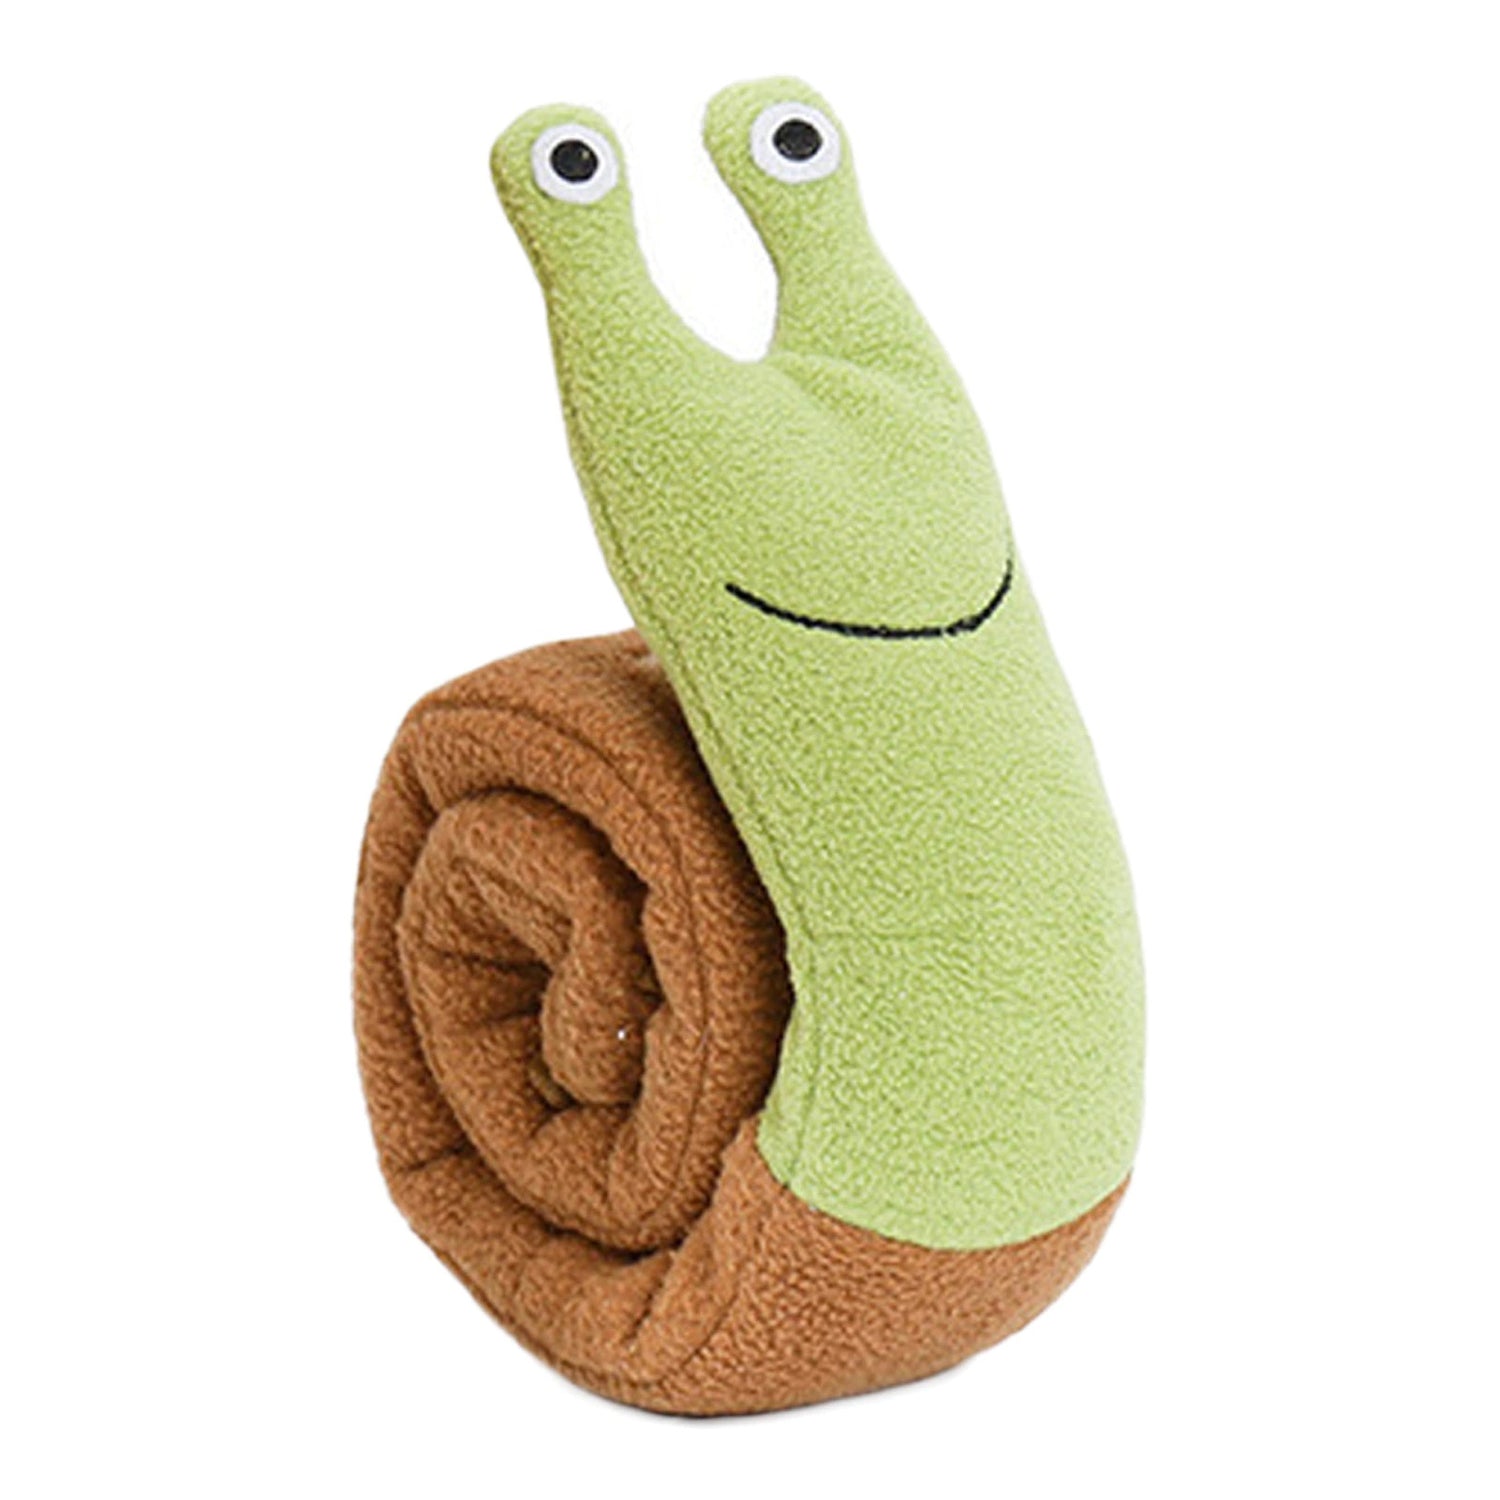 Snail Snuffle Toy